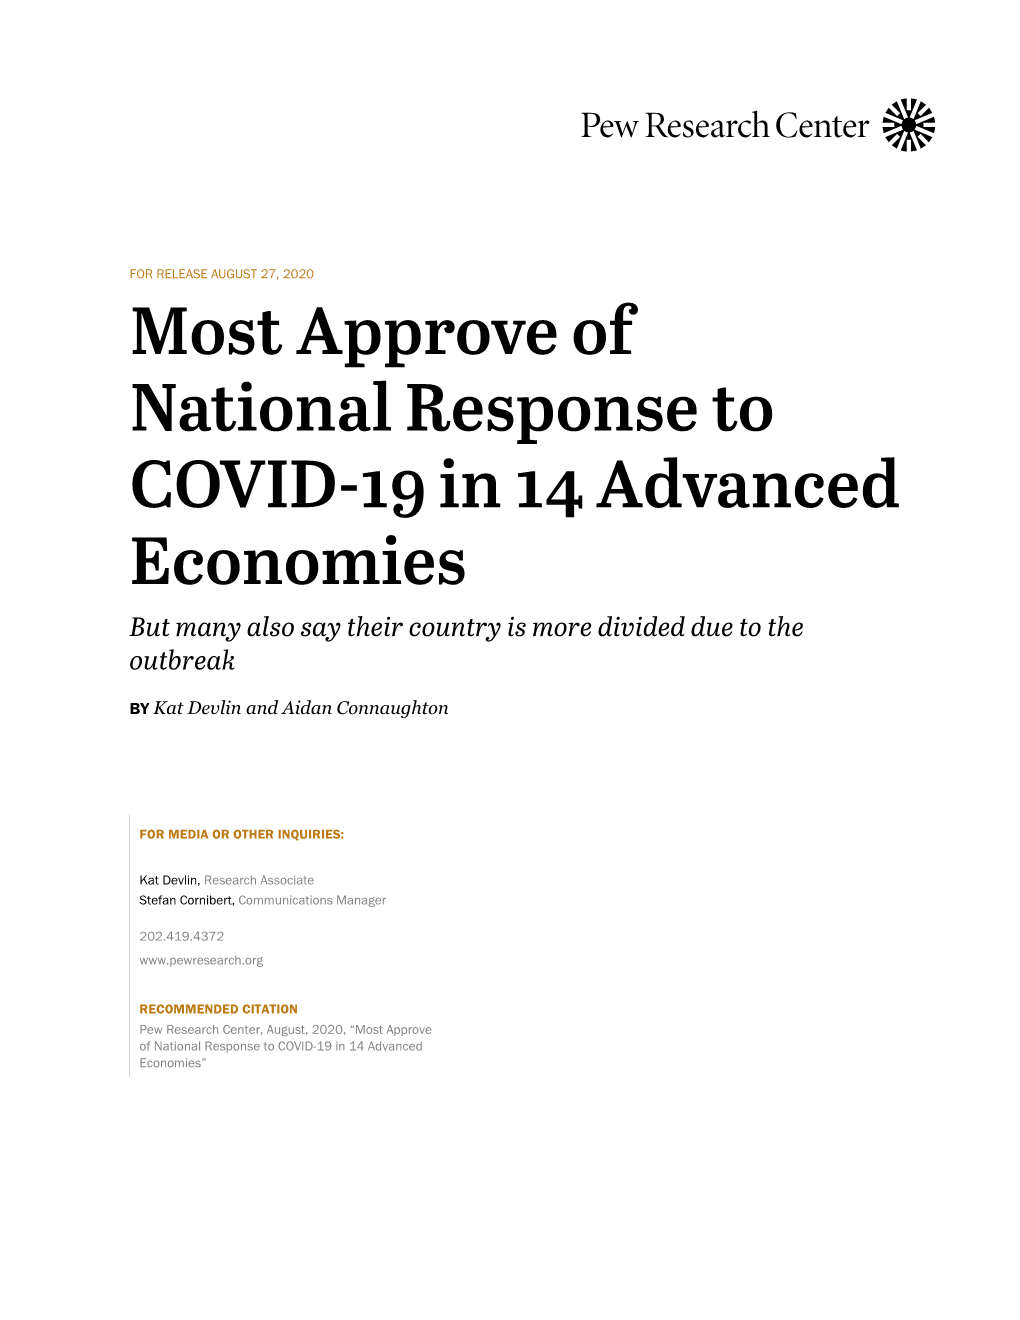 Most Approve of National Response to COVID-19 in 14 Advanced Economies but Many Also Say Their Country Is More Divided Due to the Outbreak